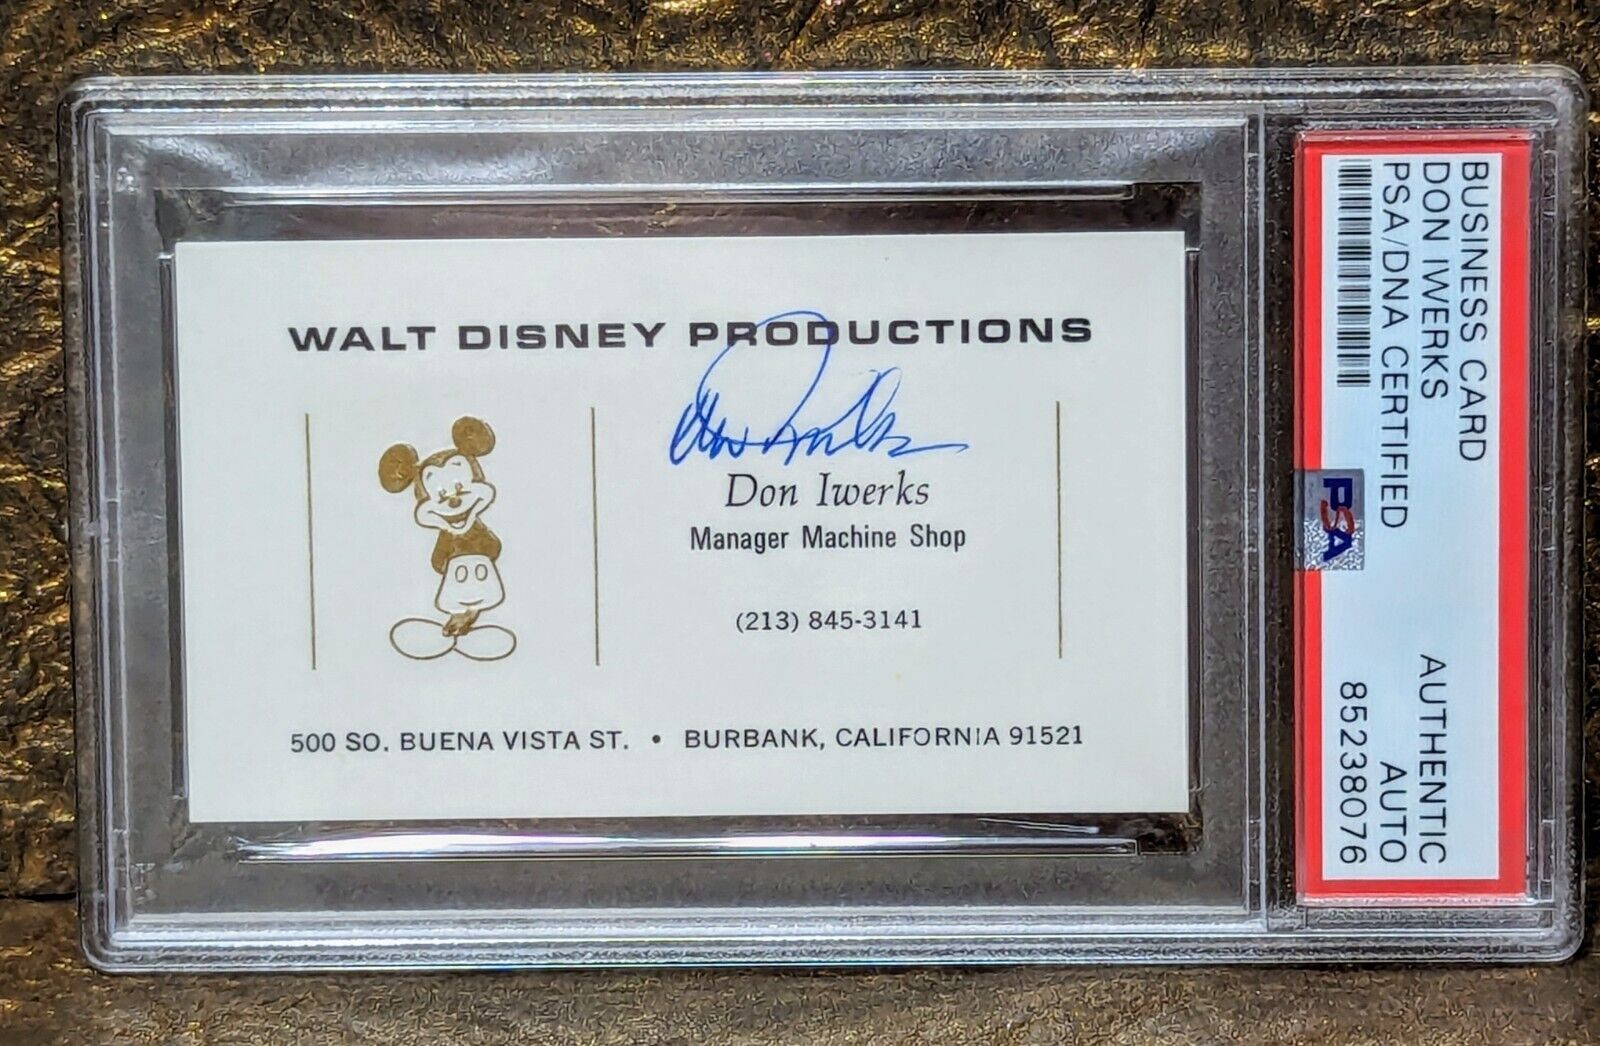 Don Iwerks Walt Disney PSA Gold Embossed Mickey Autographed Signed Business Card